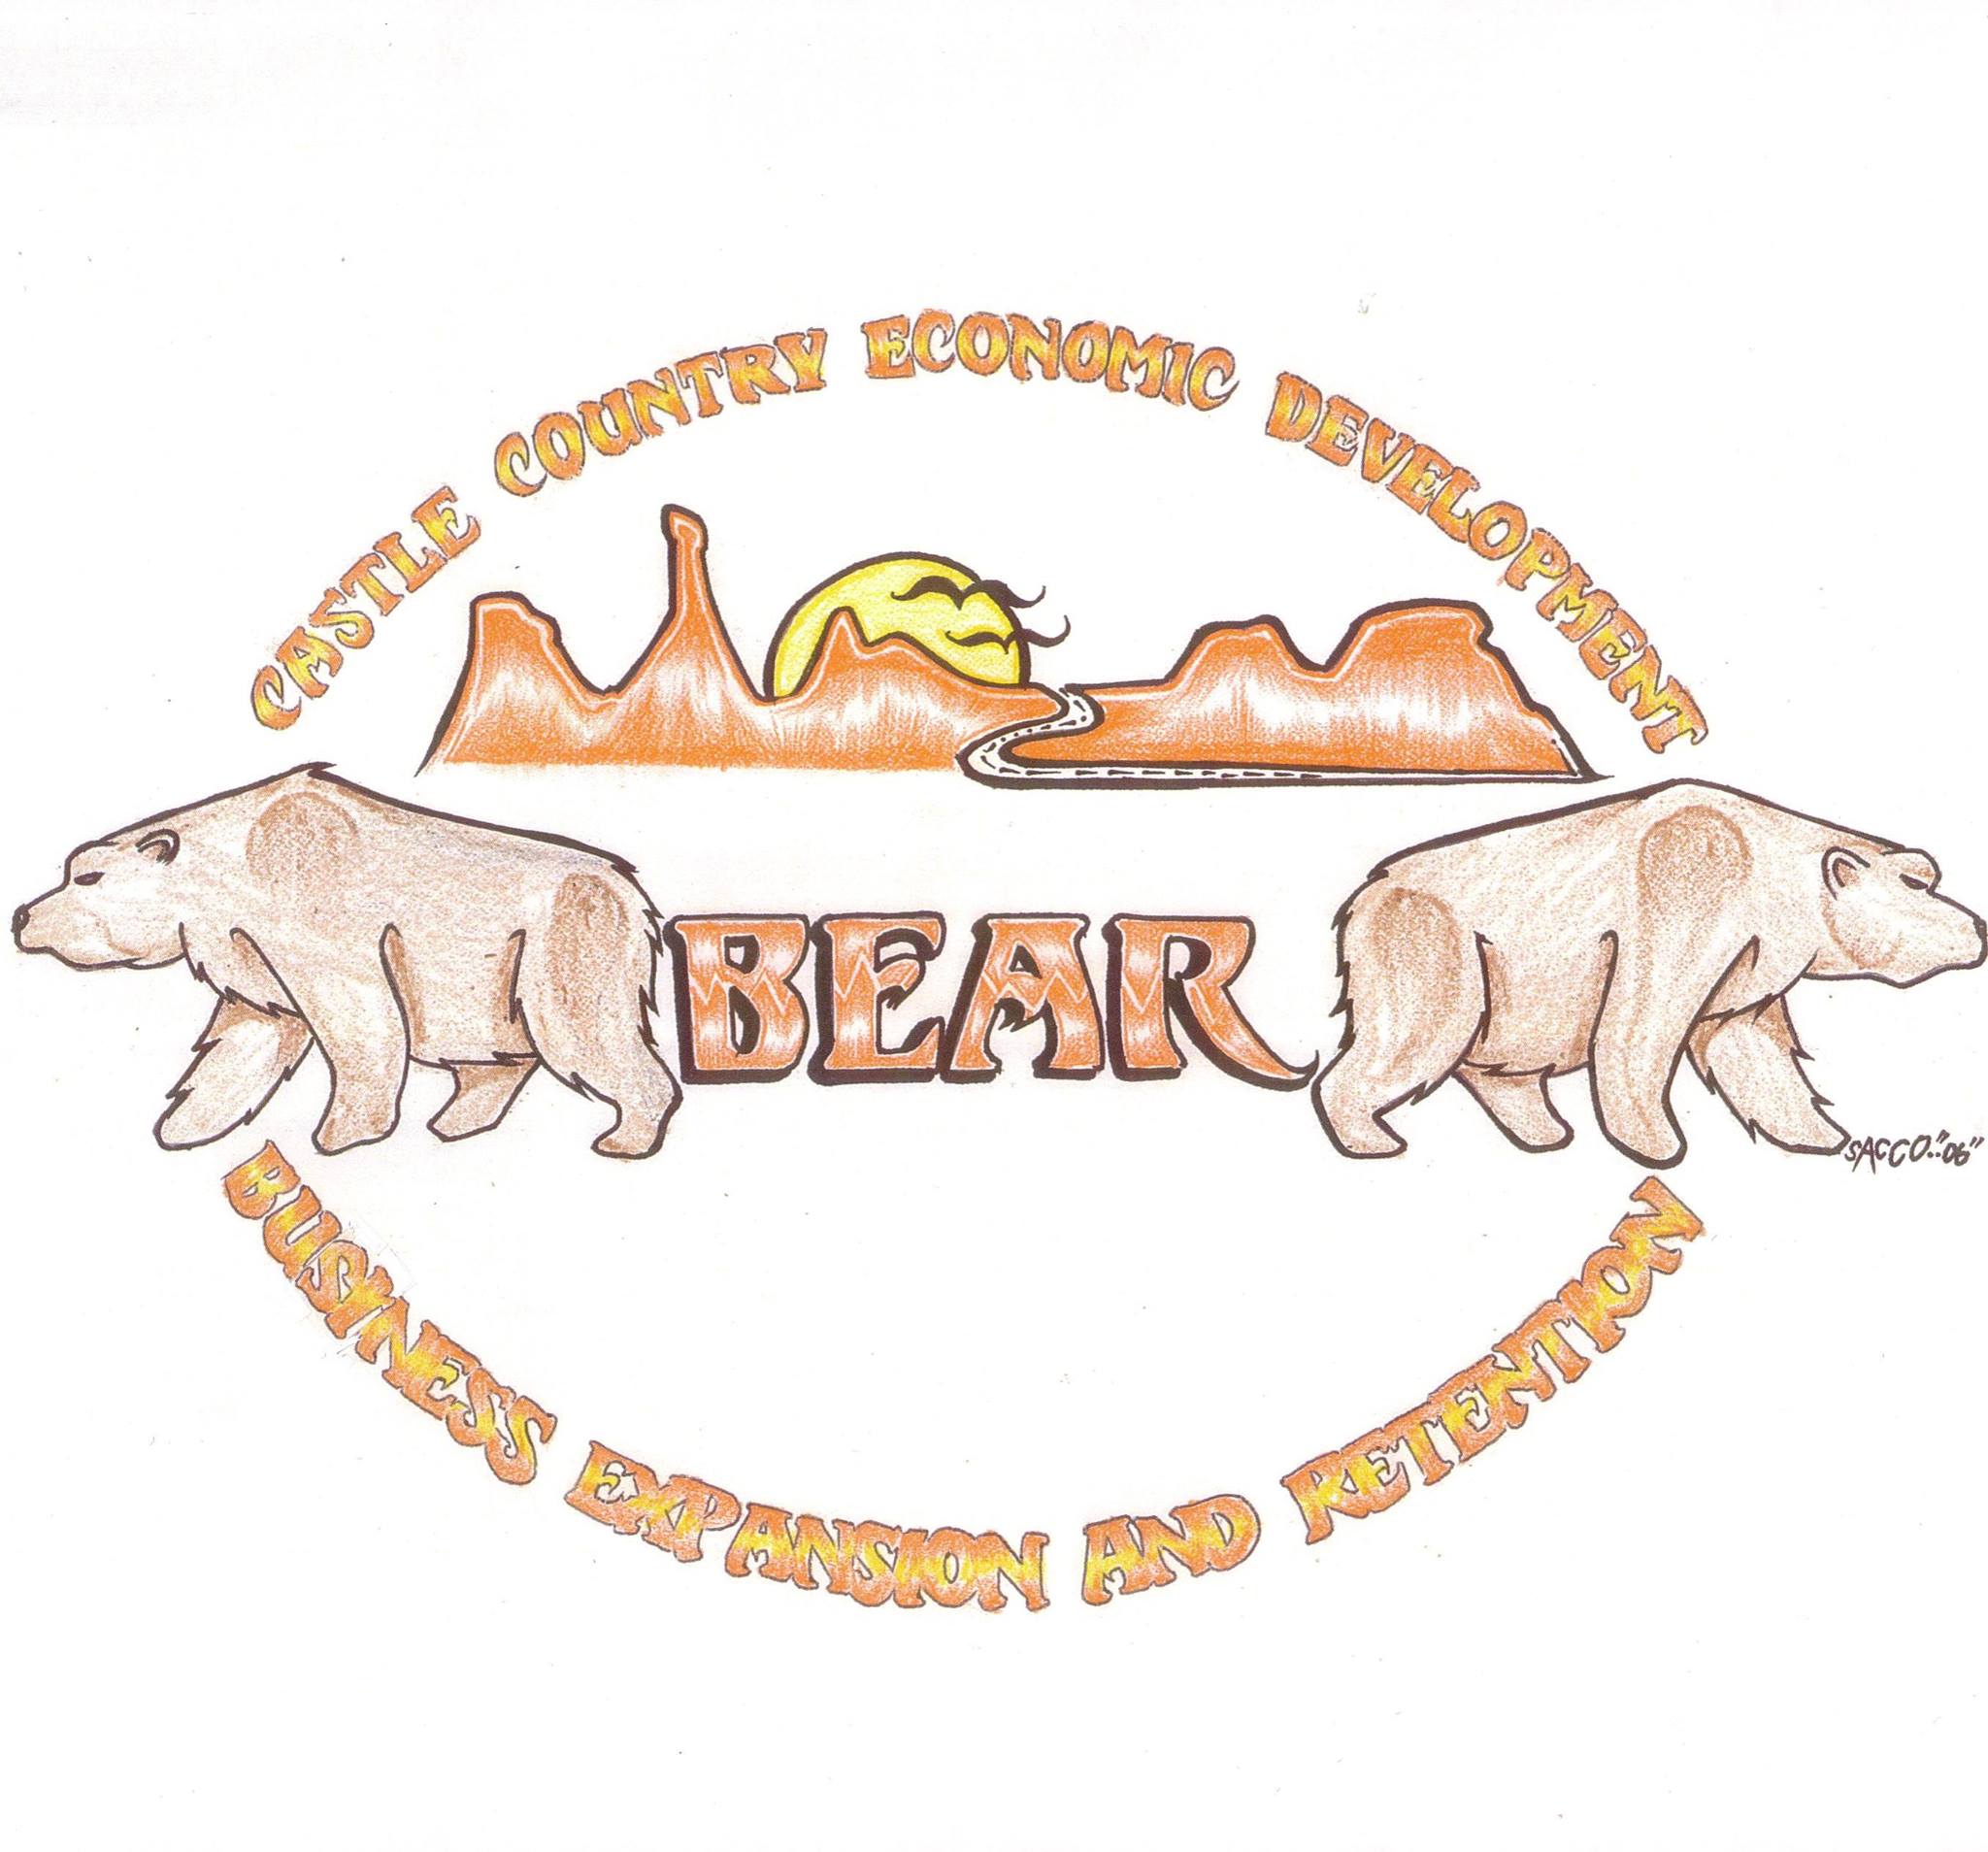 Powering Local Economic Growth: A Look at the BEAR Initiative for Carbon and Emery Counties